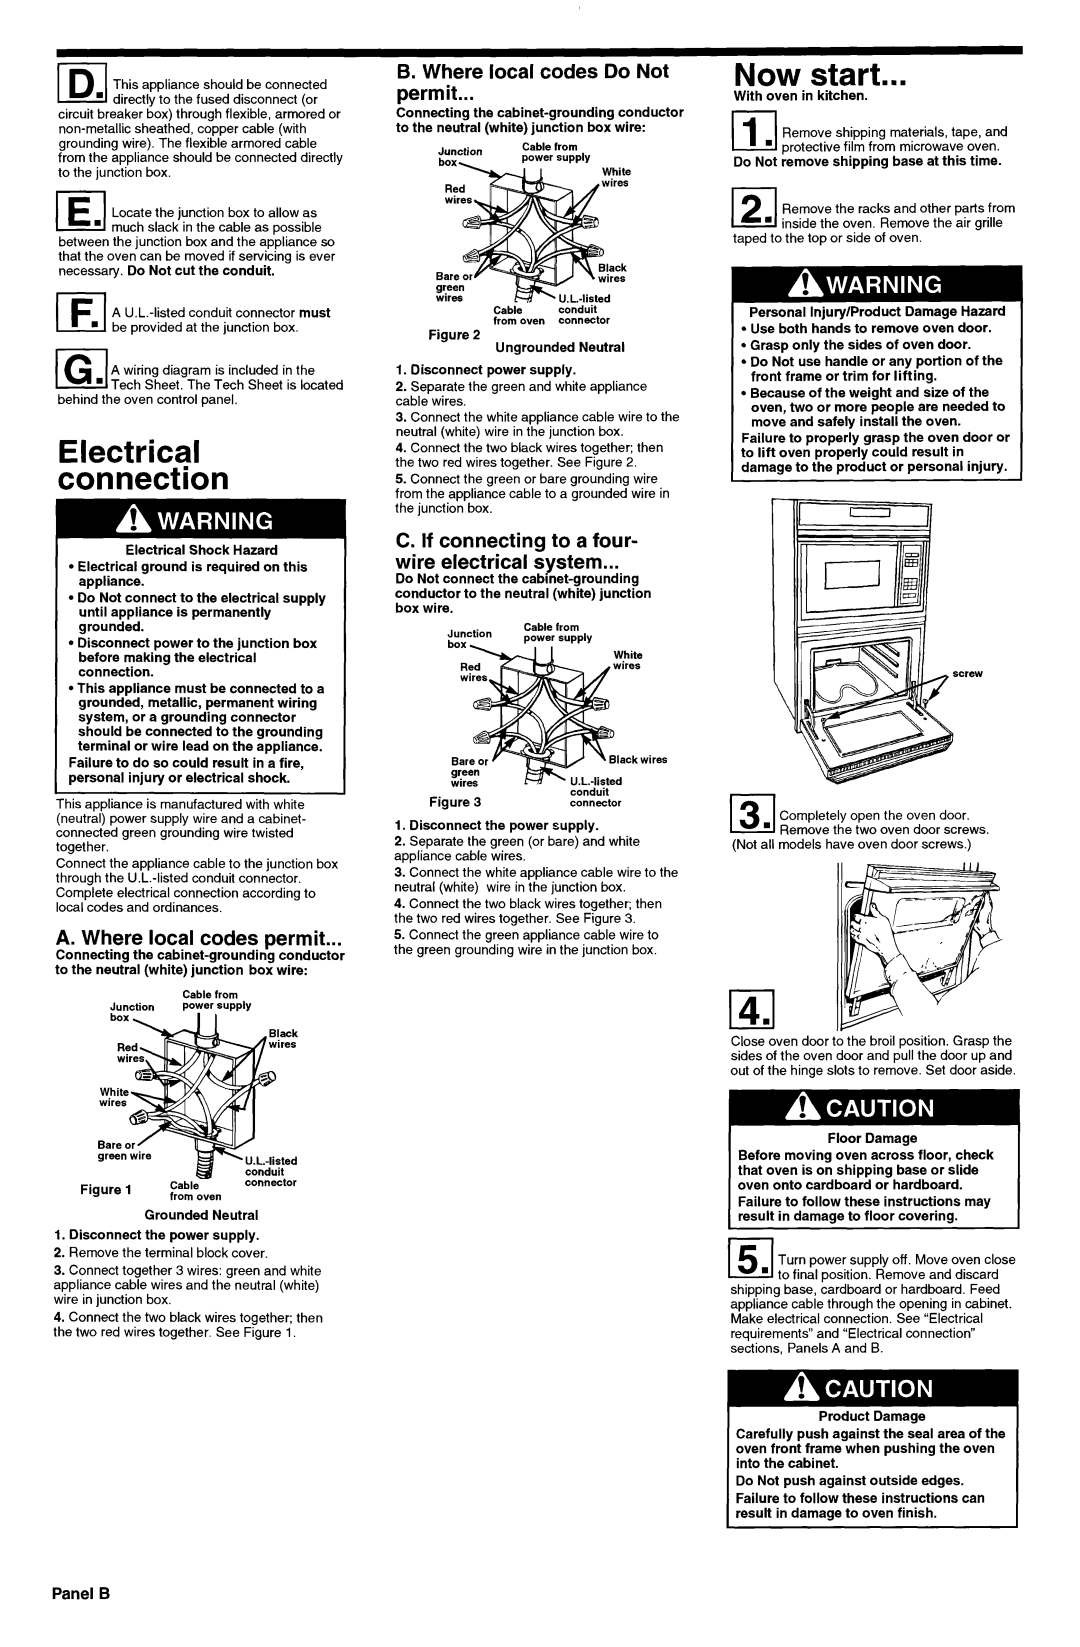 KitchenAid 3184435 REV. A Now start, Electrical connection, Panel B, 14.1, A. Where local codes permit 